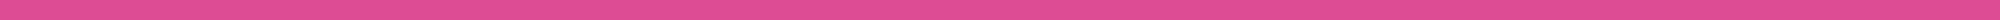 line02_pink@2x.png